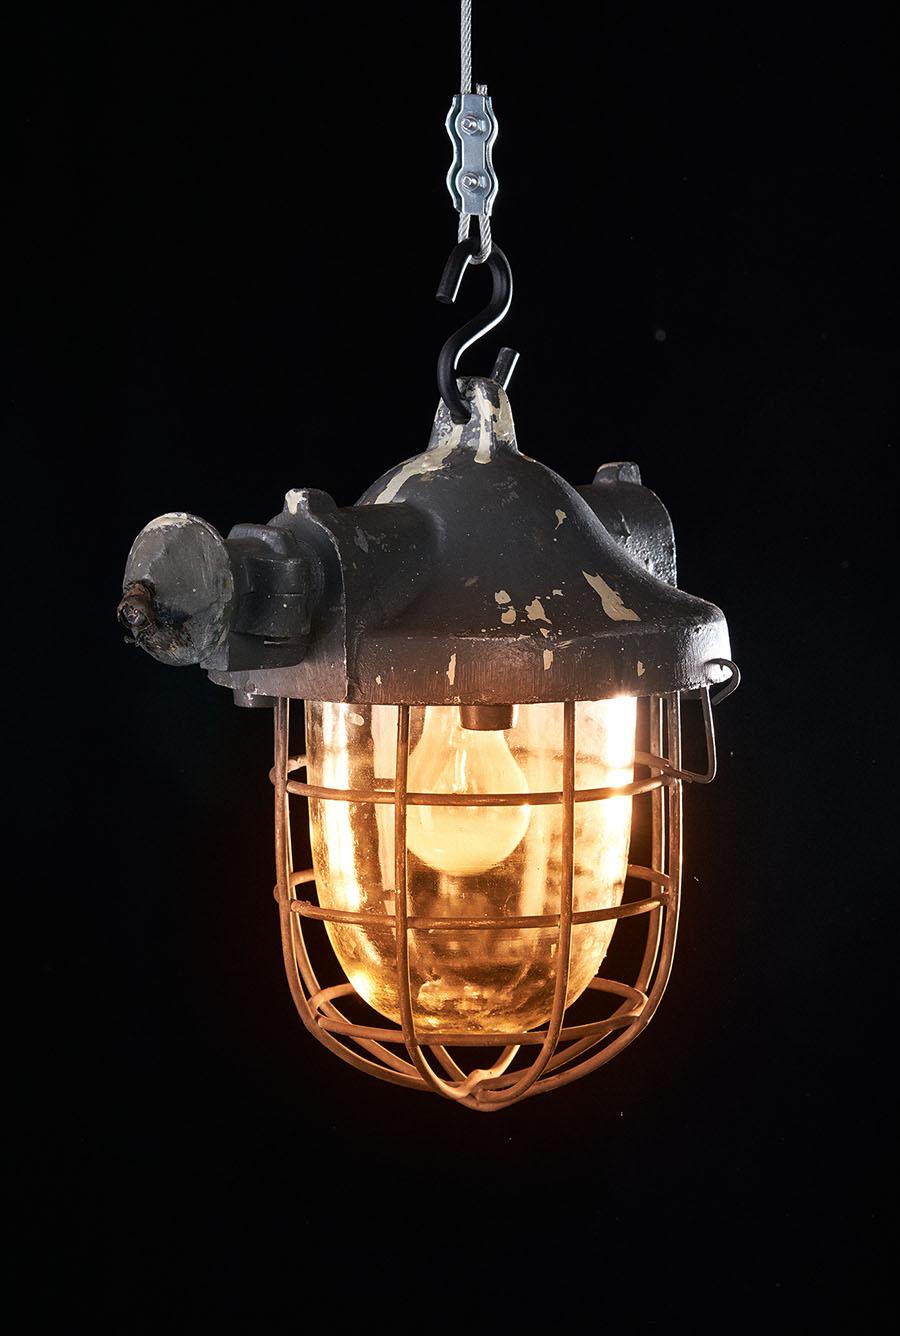 Primary Use
Mining explosion-proof luminaries for flameproof construction.
Explosion-proof luminaries were designed to illuminate gas decks of methane gas mines and other surfaces and rooms with a risk of explosion 